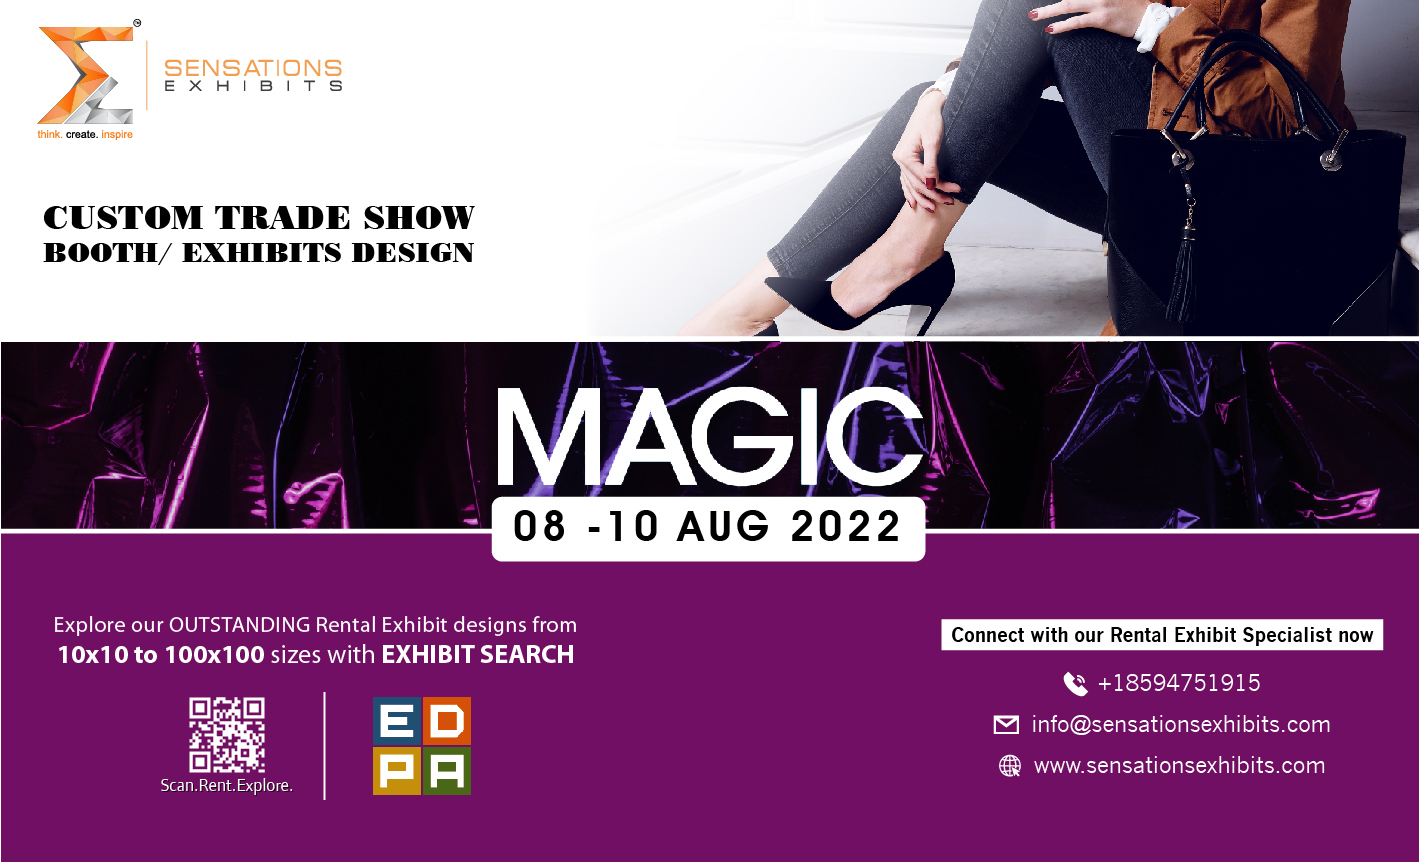 MAGIC returns to Las Vegas for 2022 fashion industry show